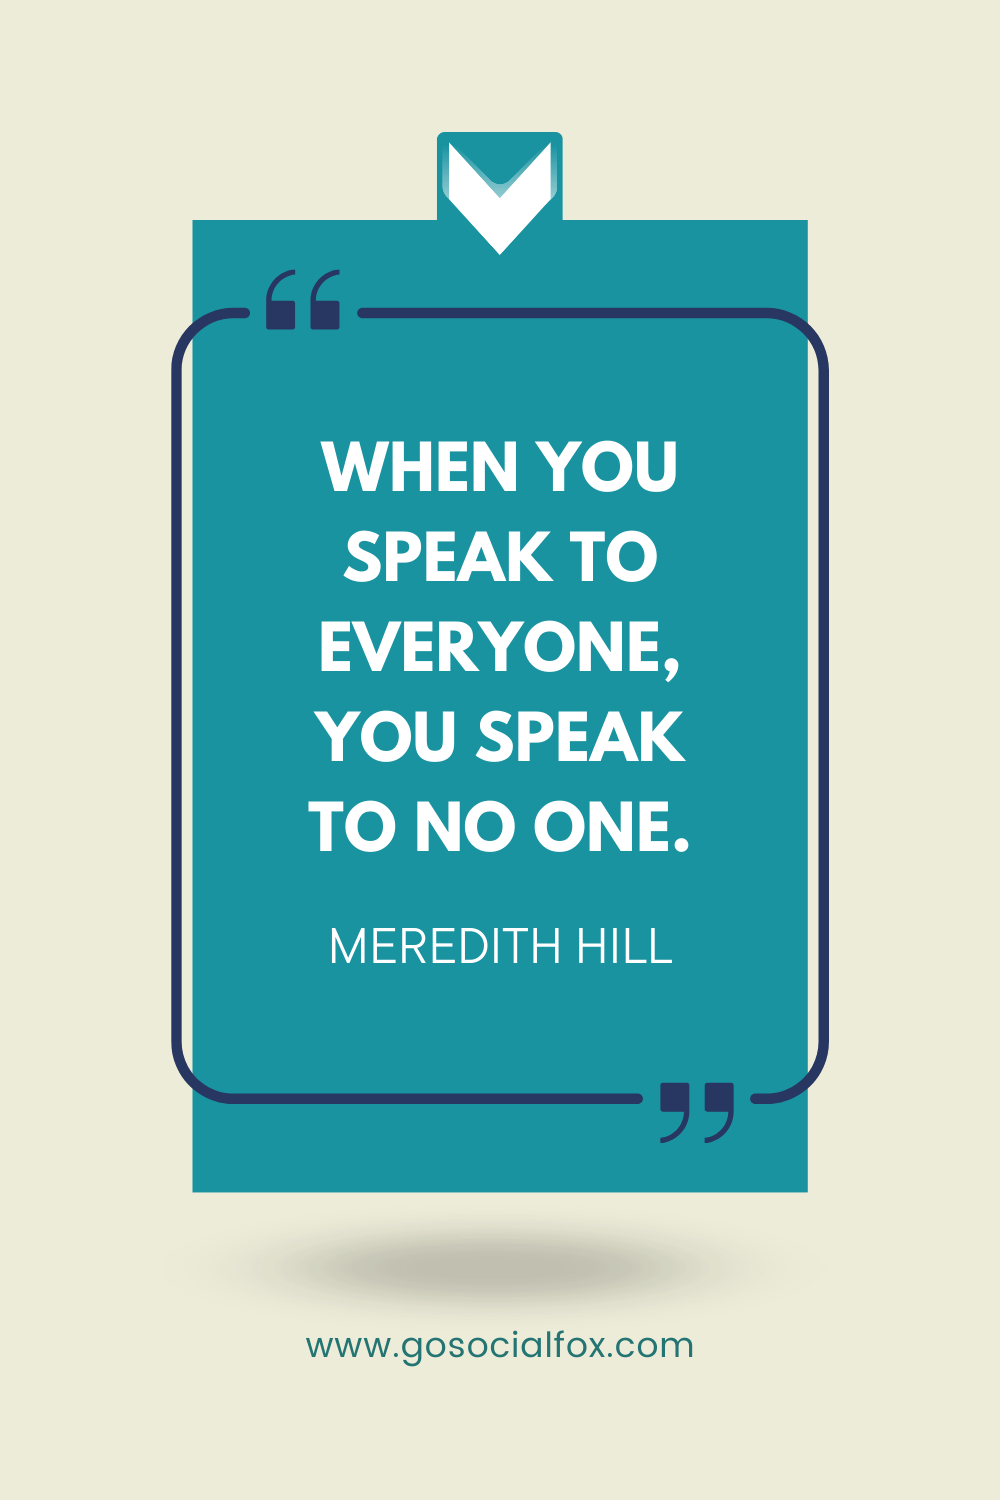 When you speak to everyone, you speak to no one. Meredith Hill quote.